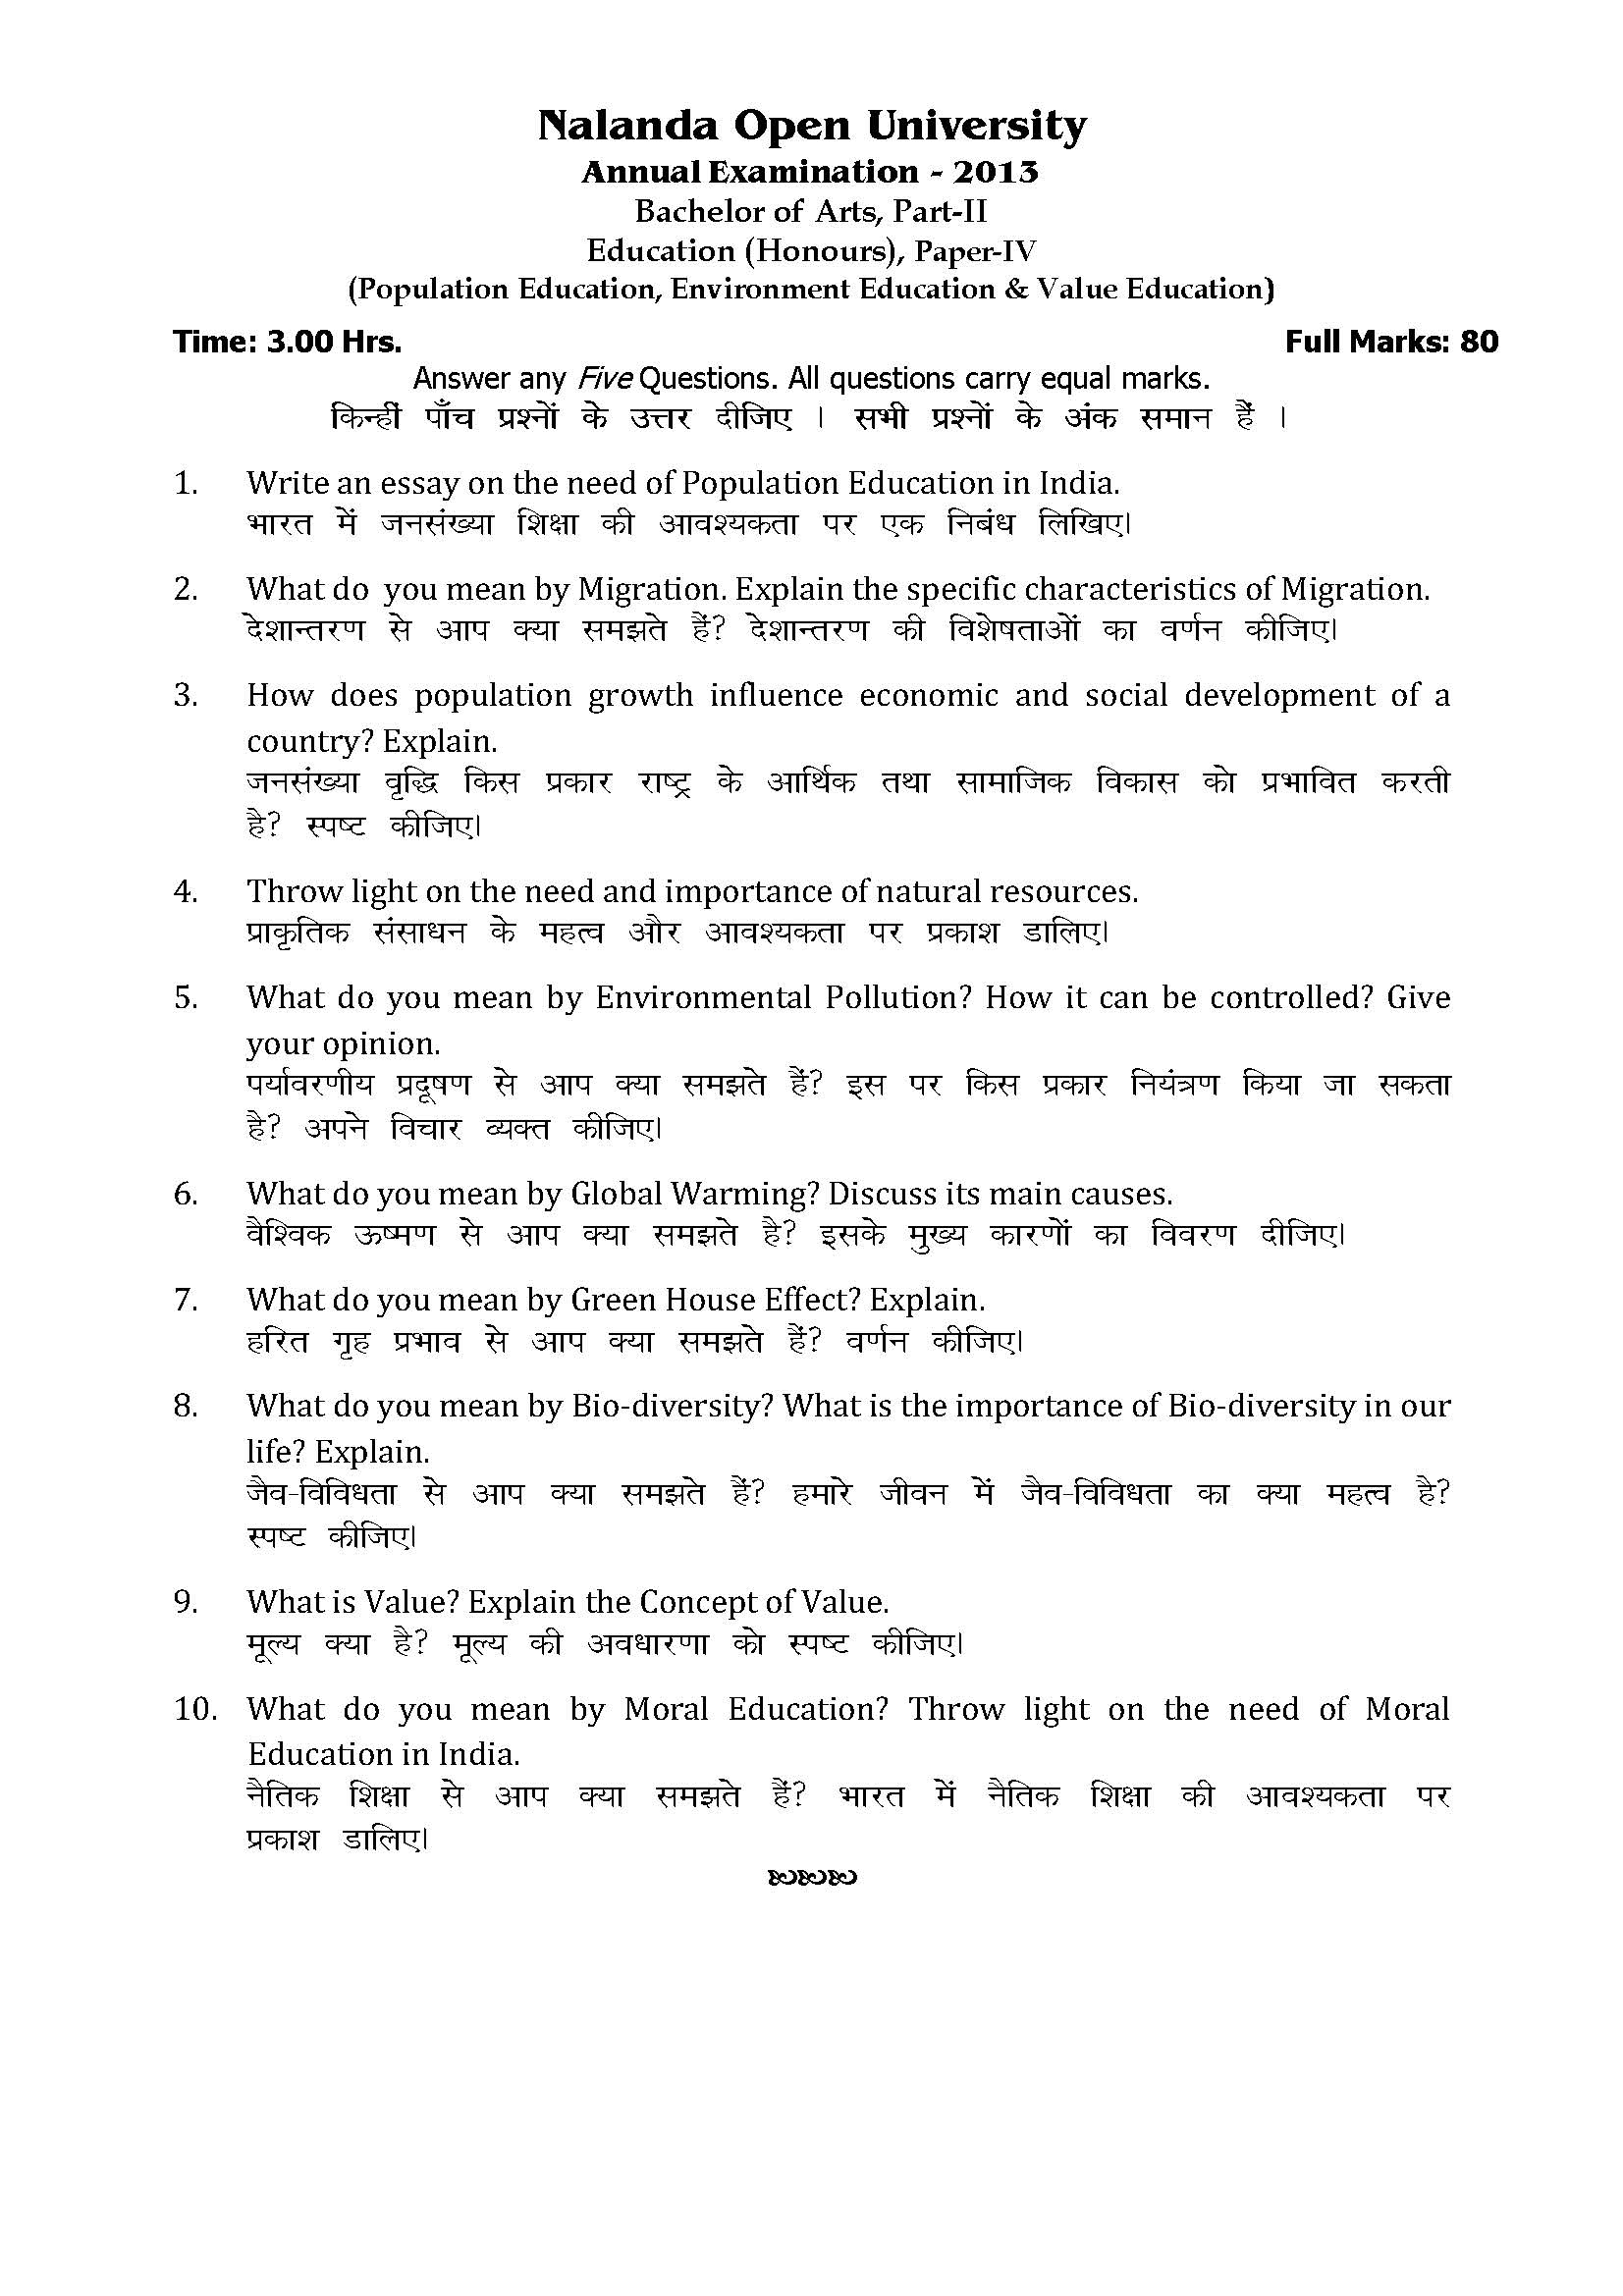 value education question paper with answers